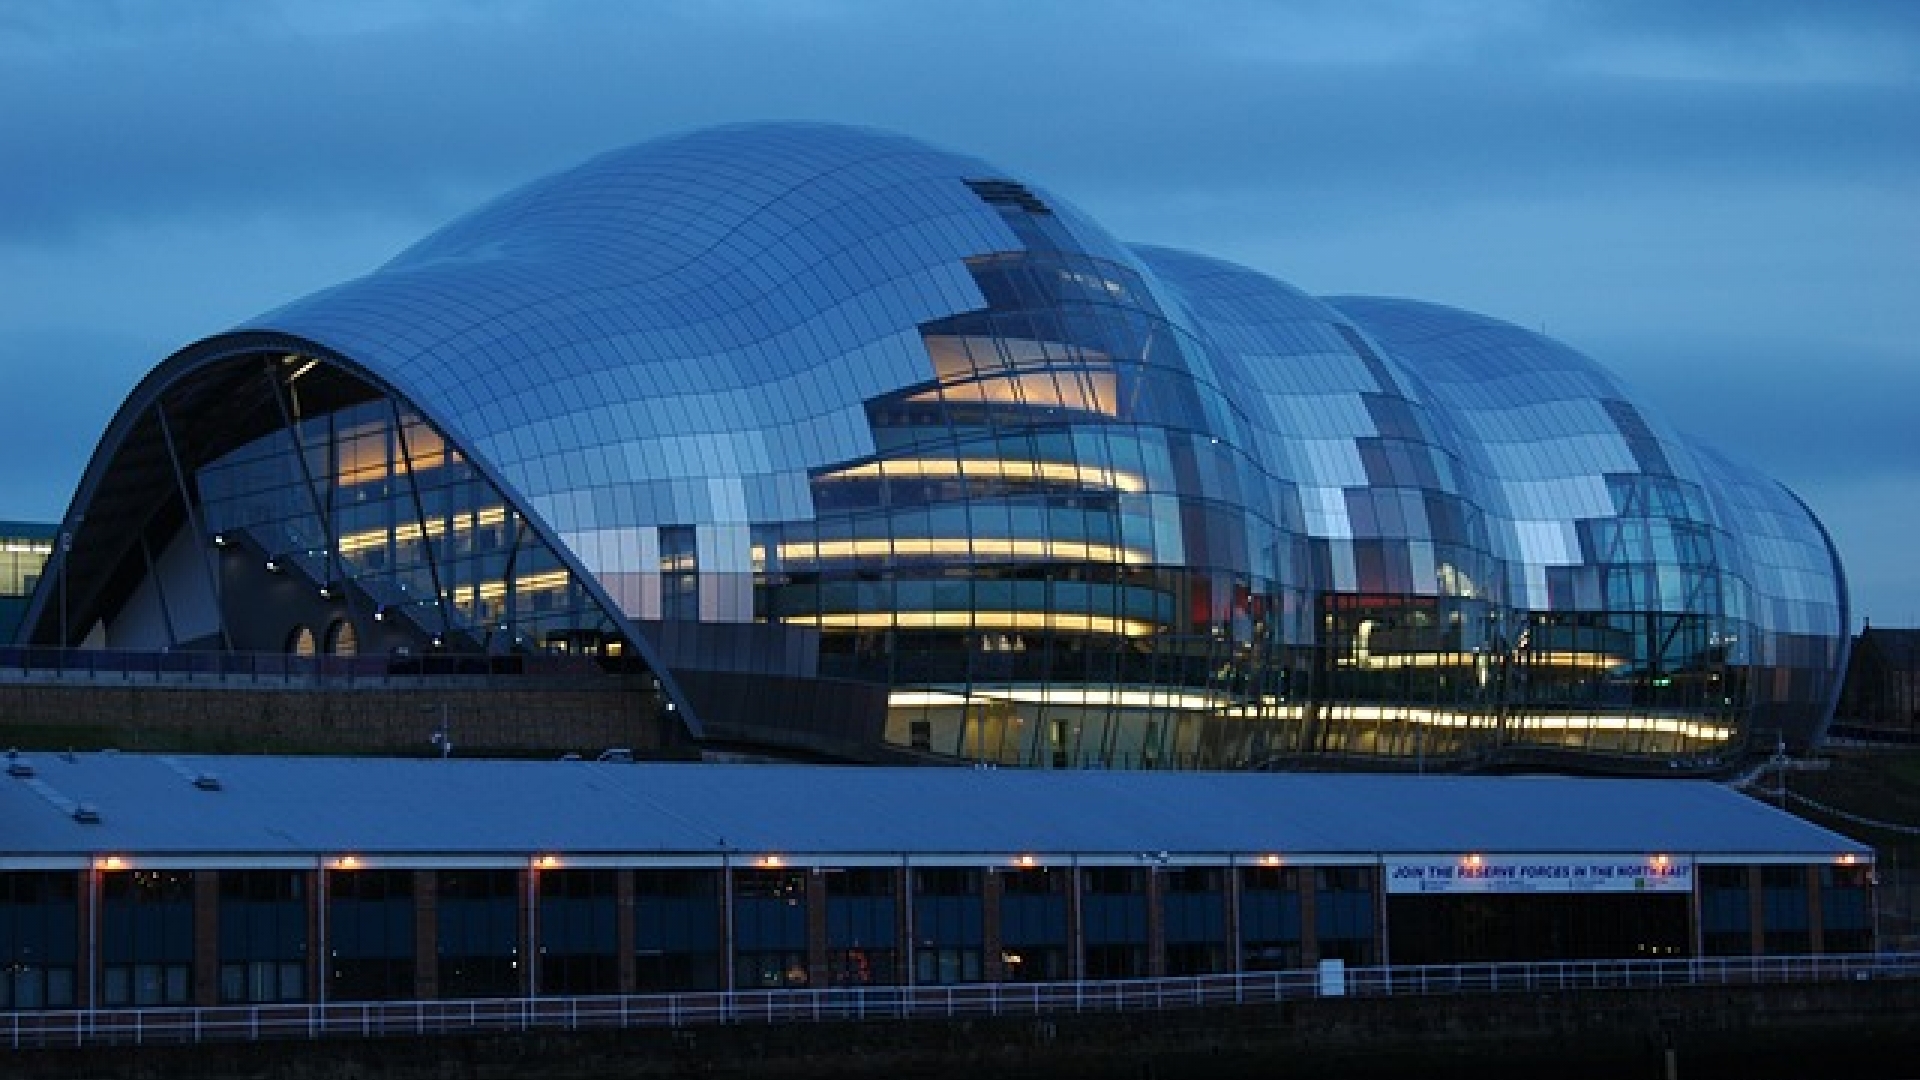 Enjoying one of the wonderful buildings on the quayside. The sage is an innovation of design and function